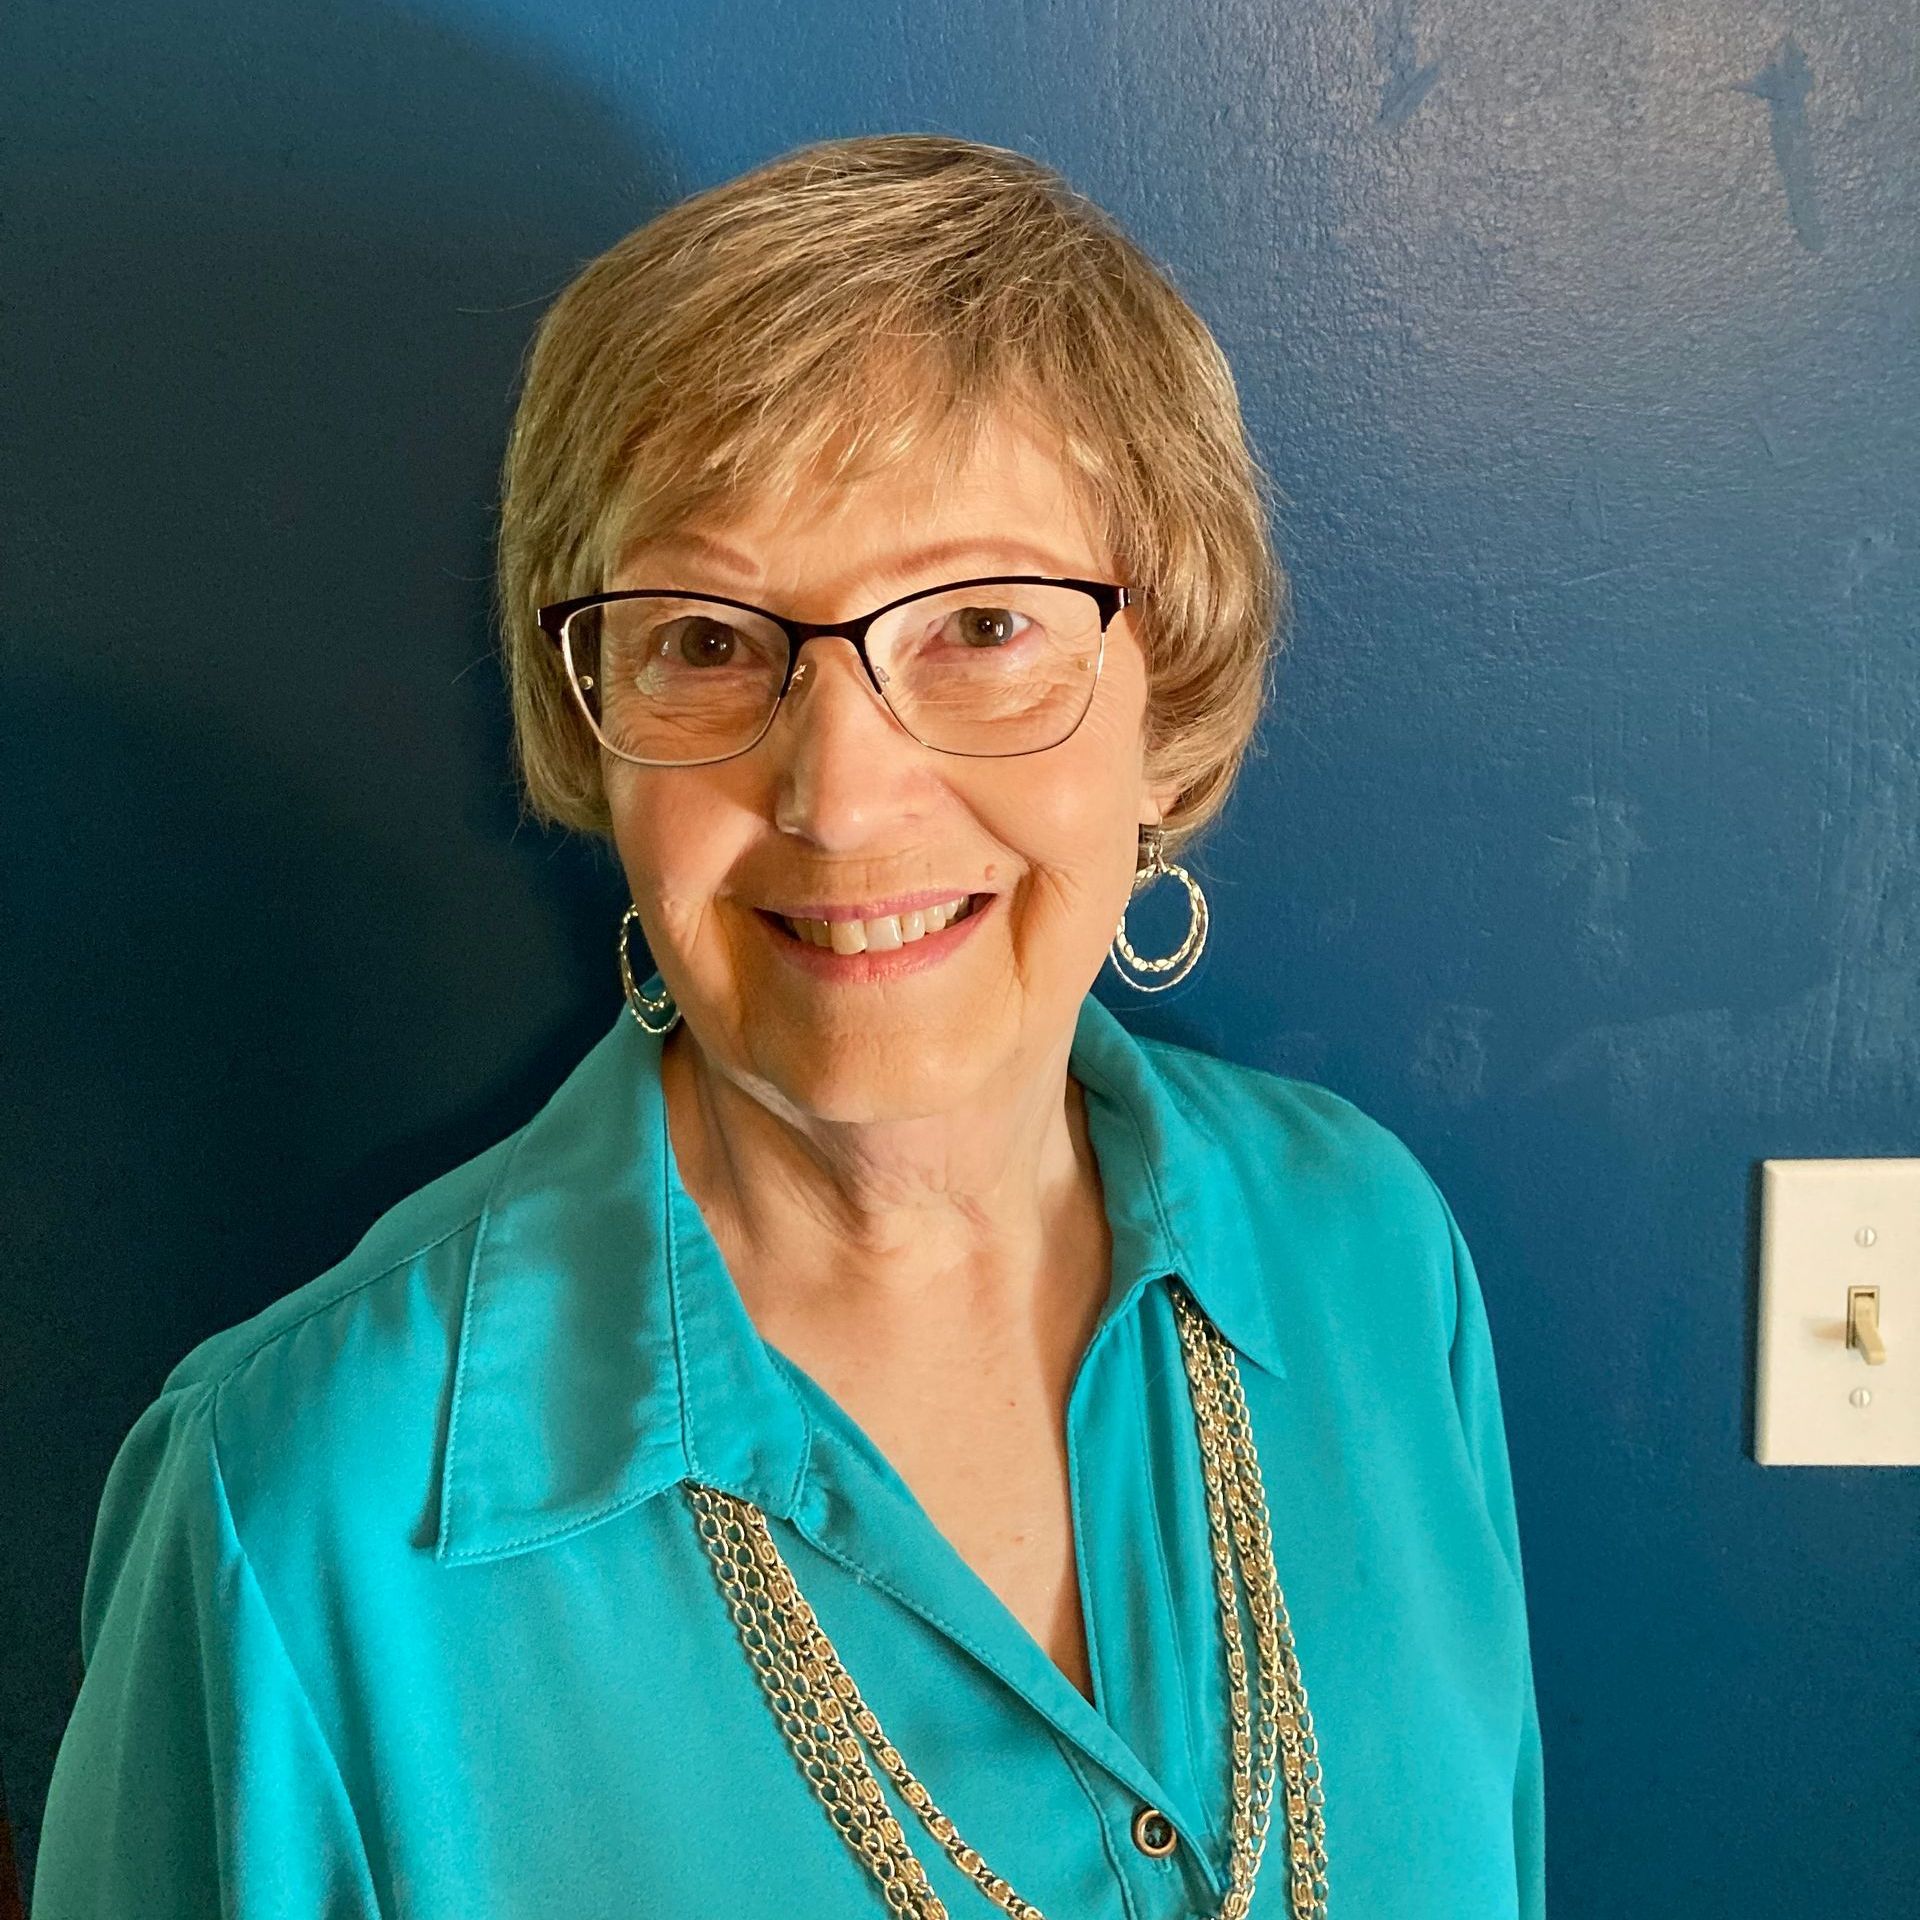 a woman wearing glasses and a blue shirt smiles for the camera